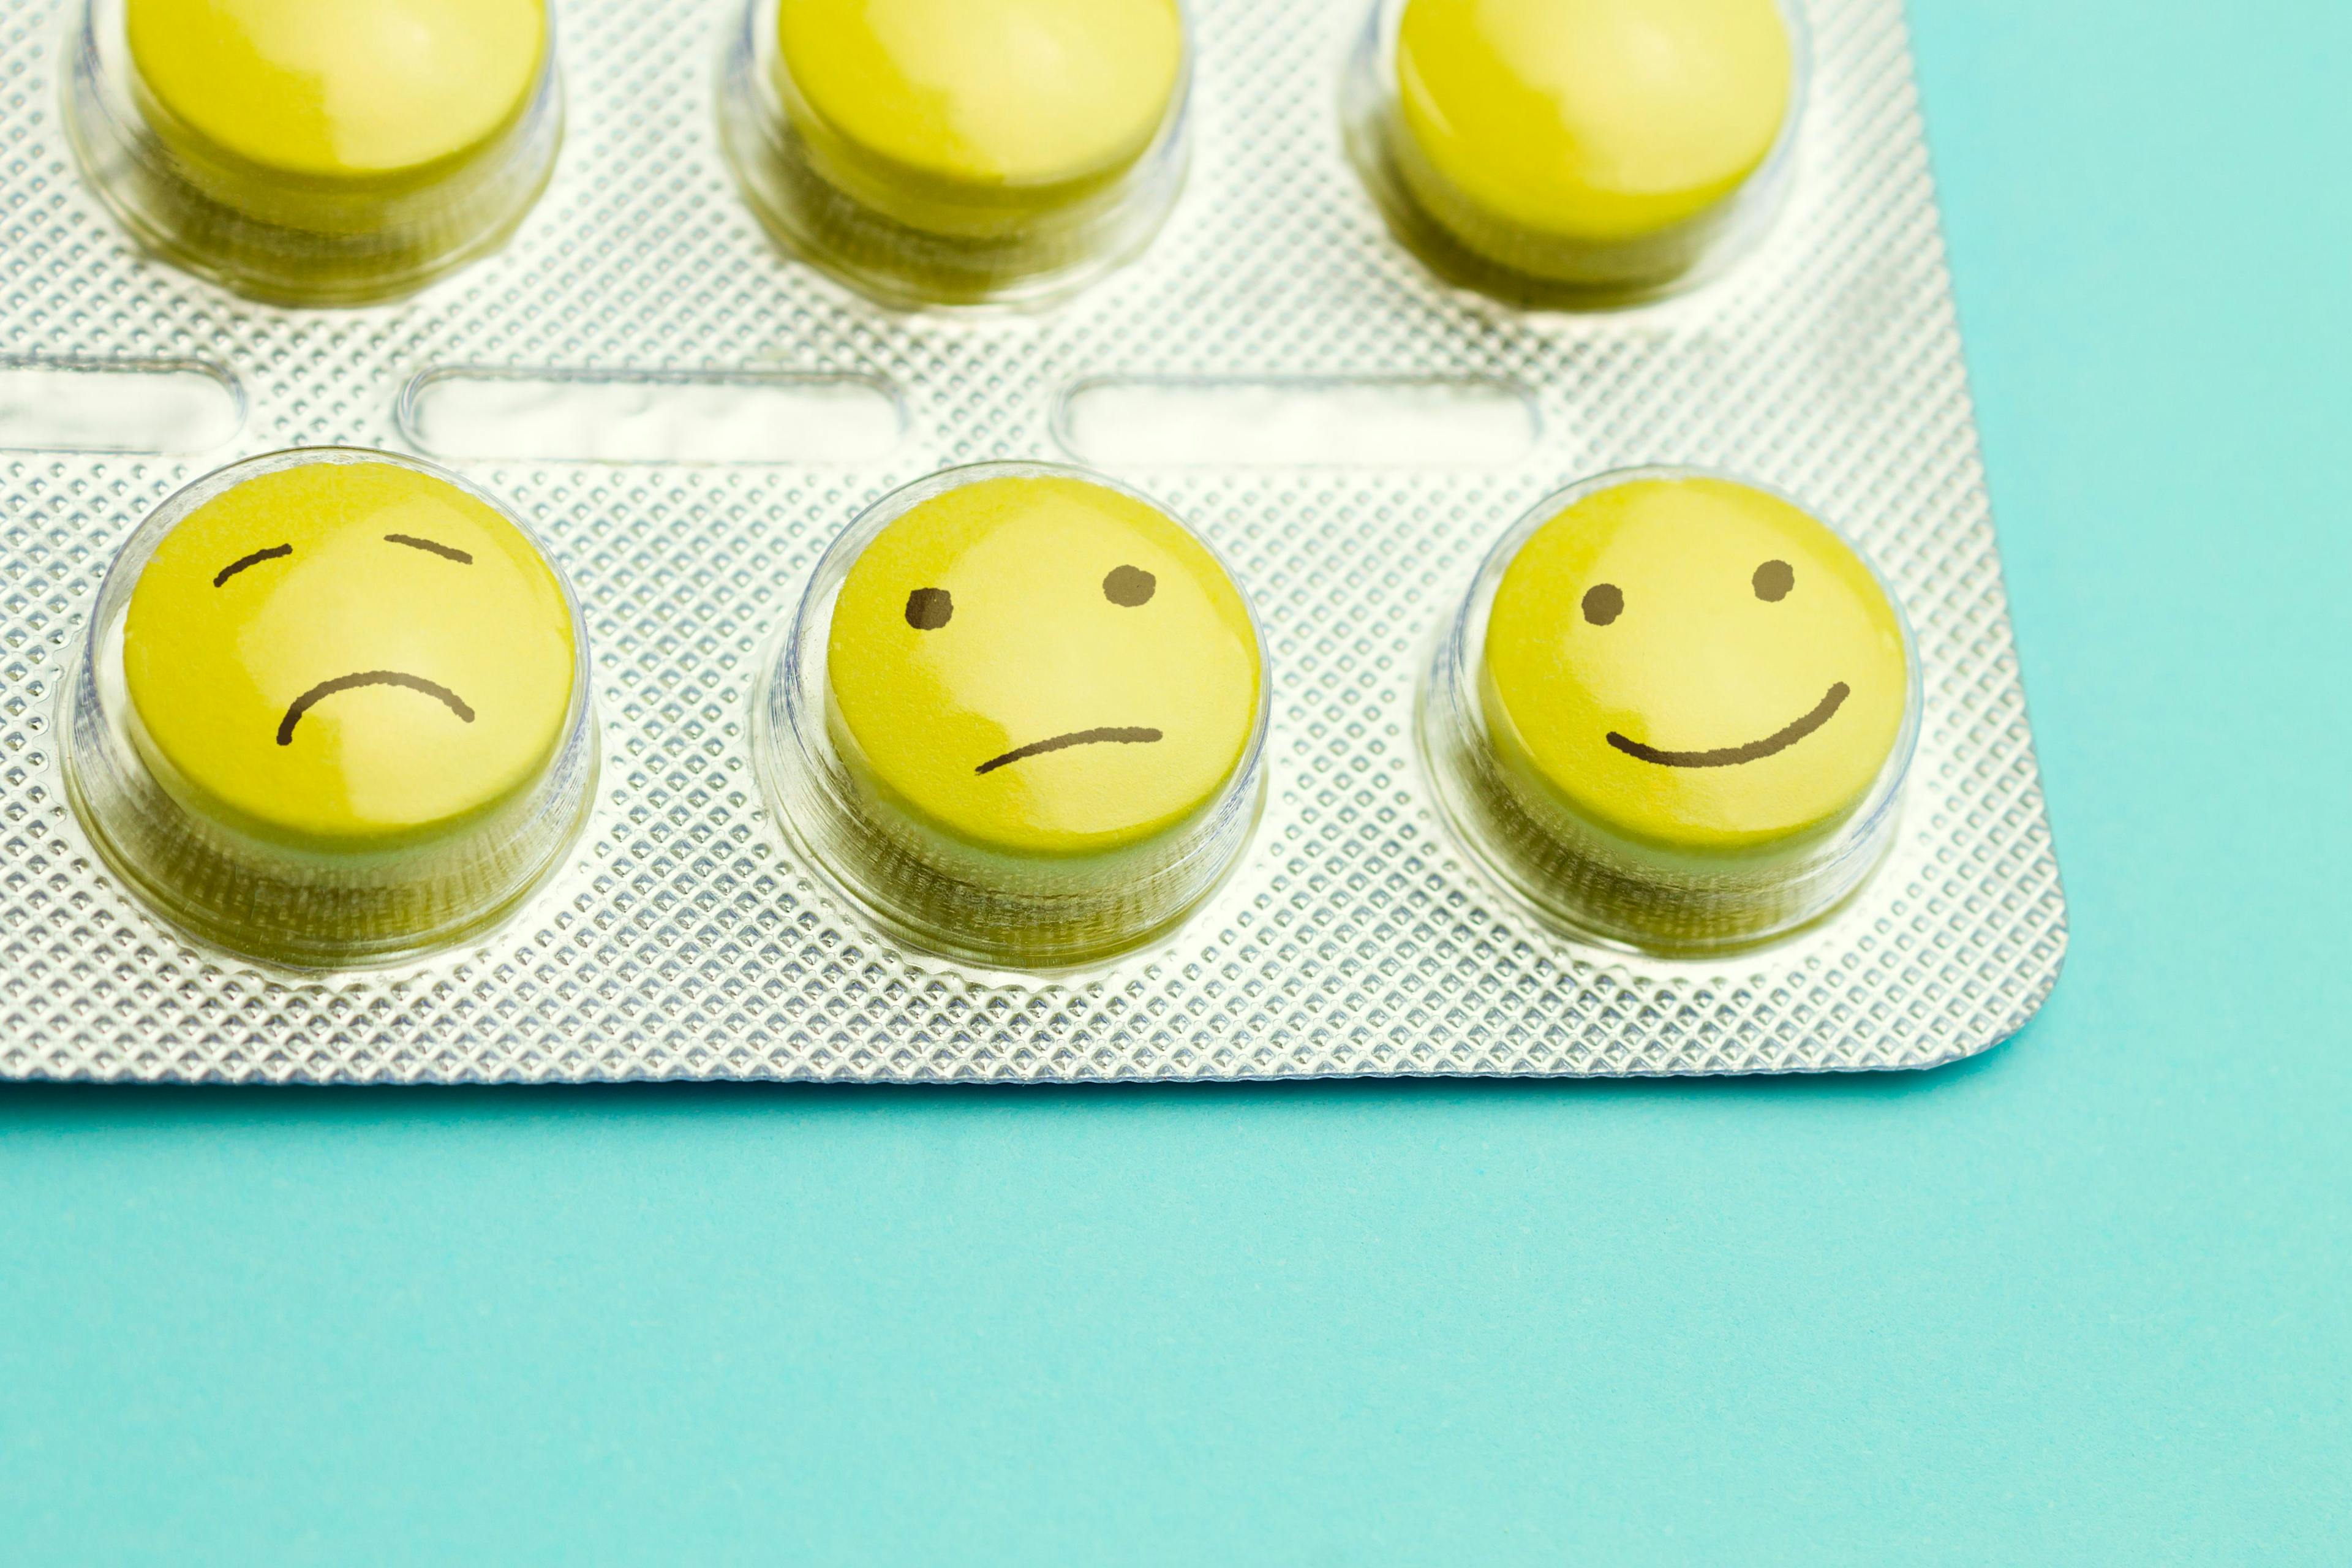 Yellow pills and funny faces in a blister on a blue background. The concept of antidepressants and healing | Image Credit: © TanyaJoy - stock.adobe.com